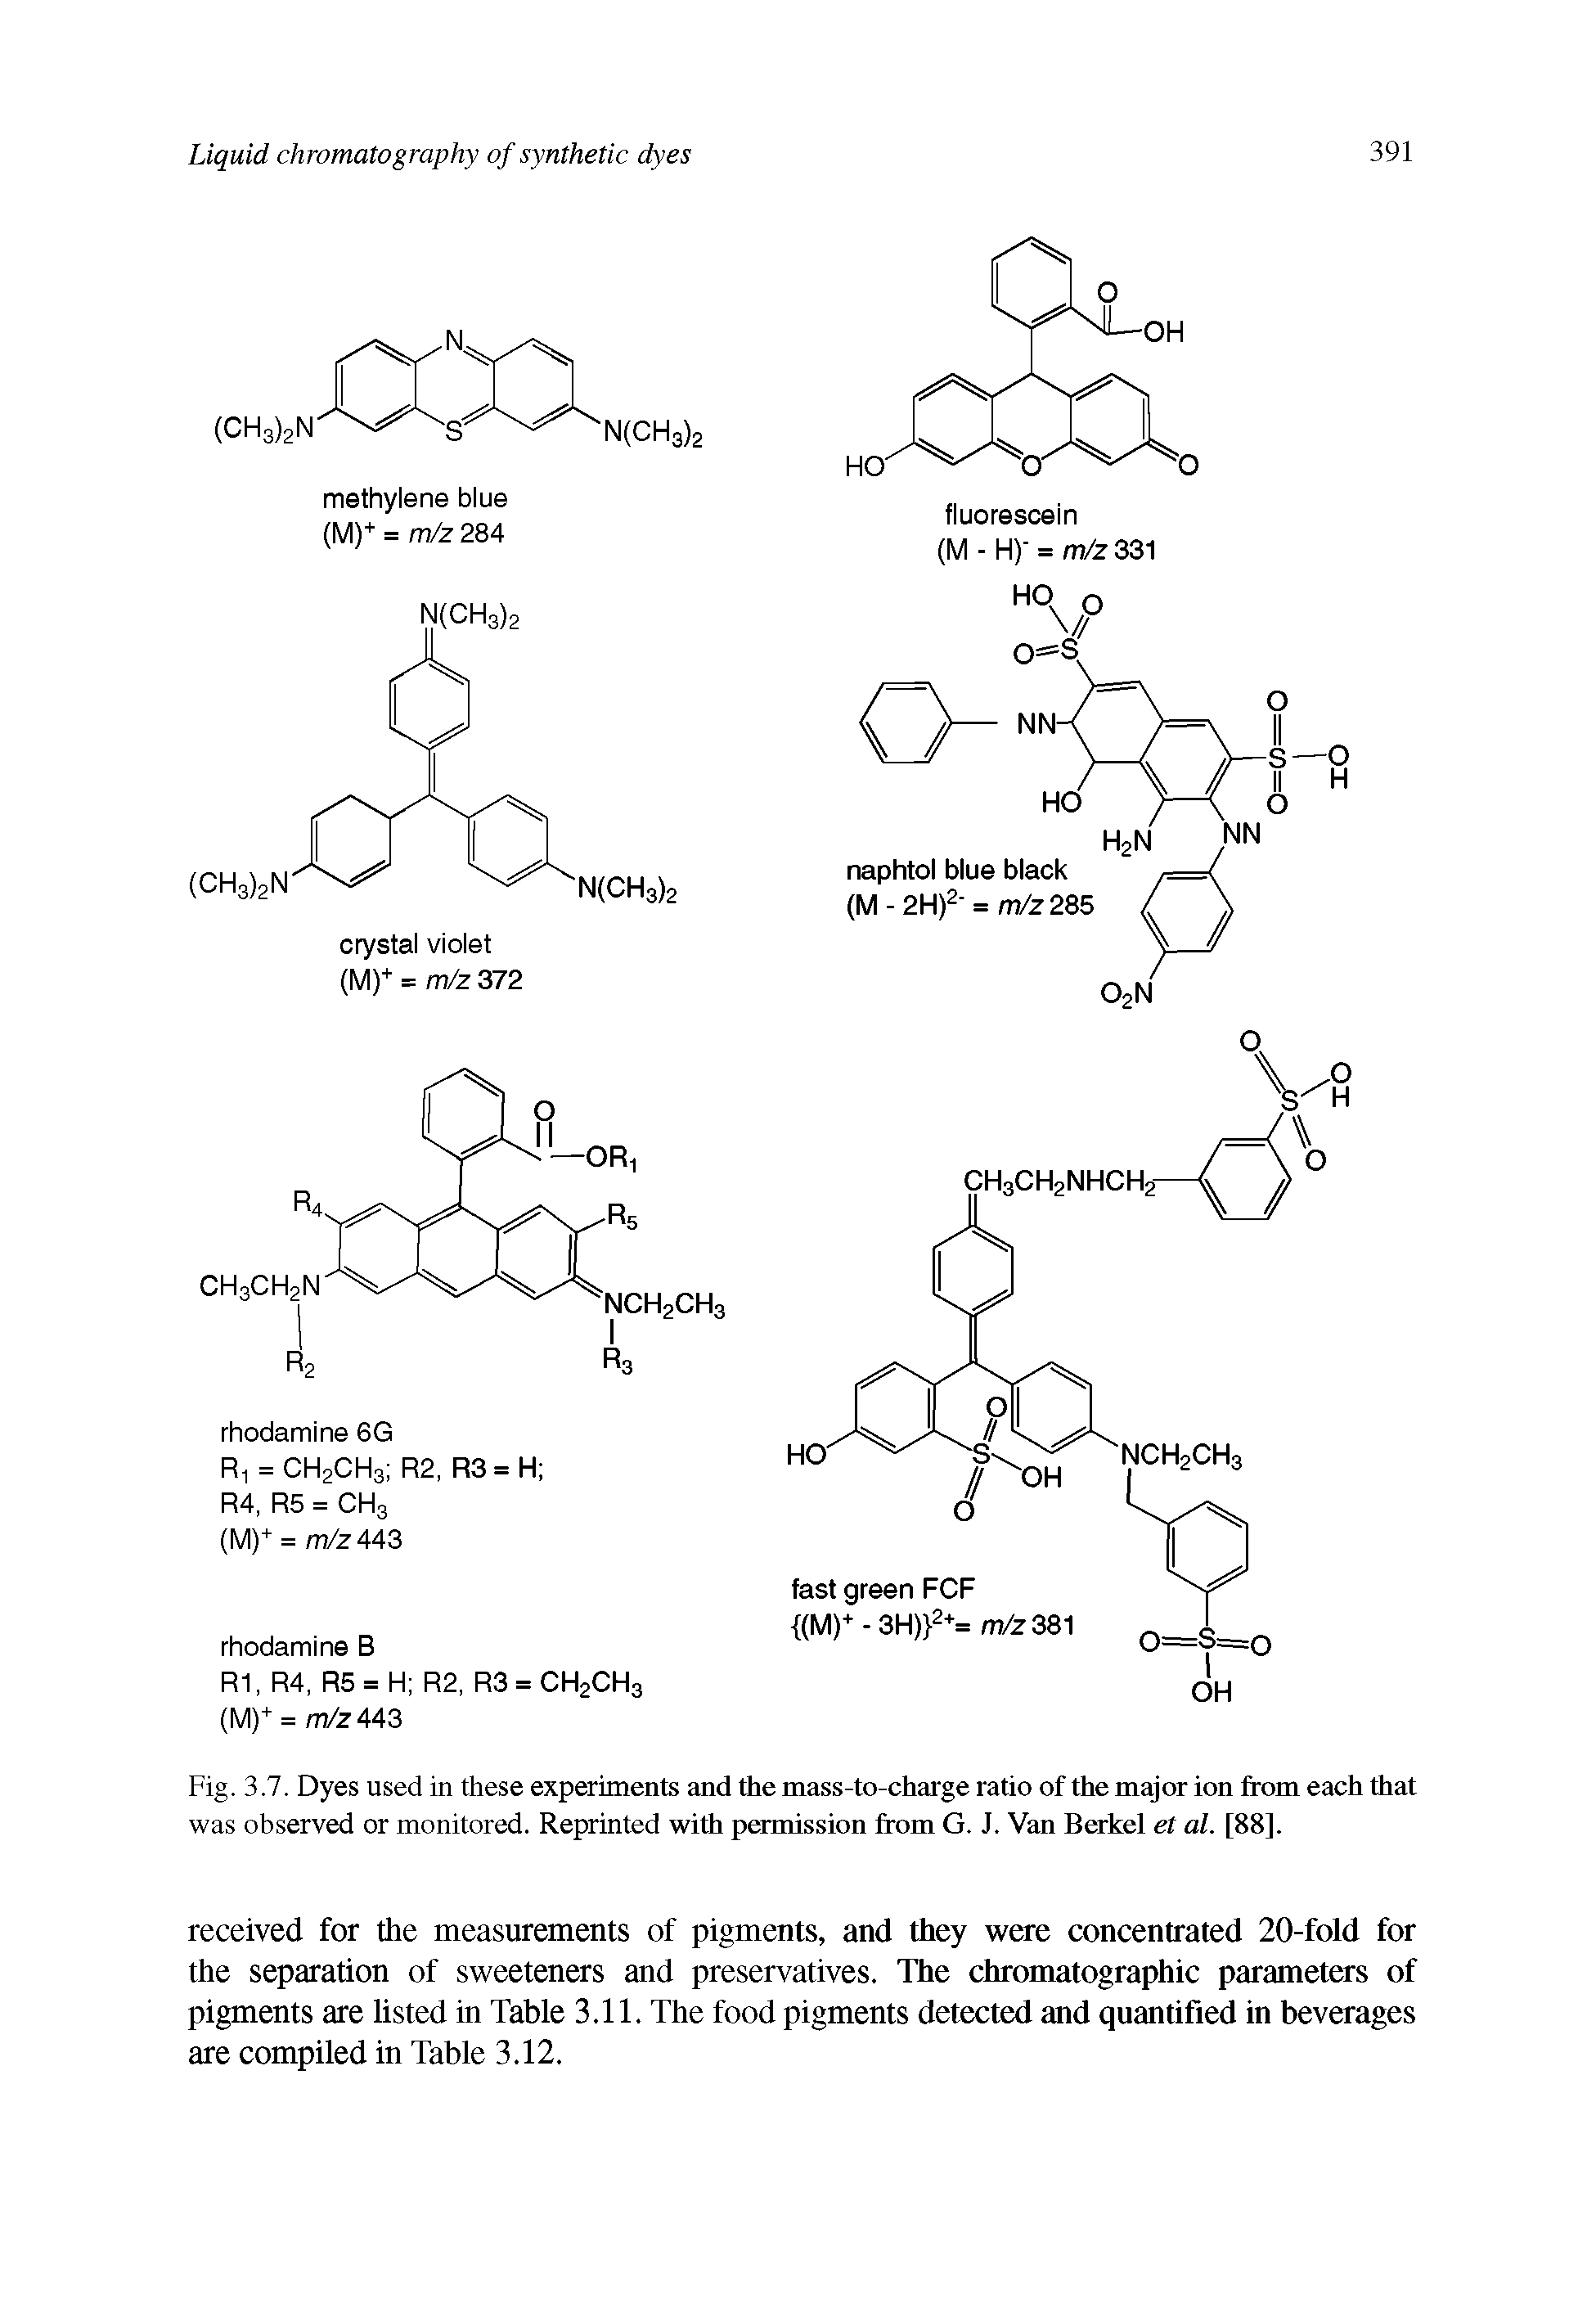 Fig. 3.7. Dyes used in these experiments and the mass-to-charge ratio of the major ion from each that was observed or monitored. Reprinted with permission from G. J. Van Berkel el al. [88].